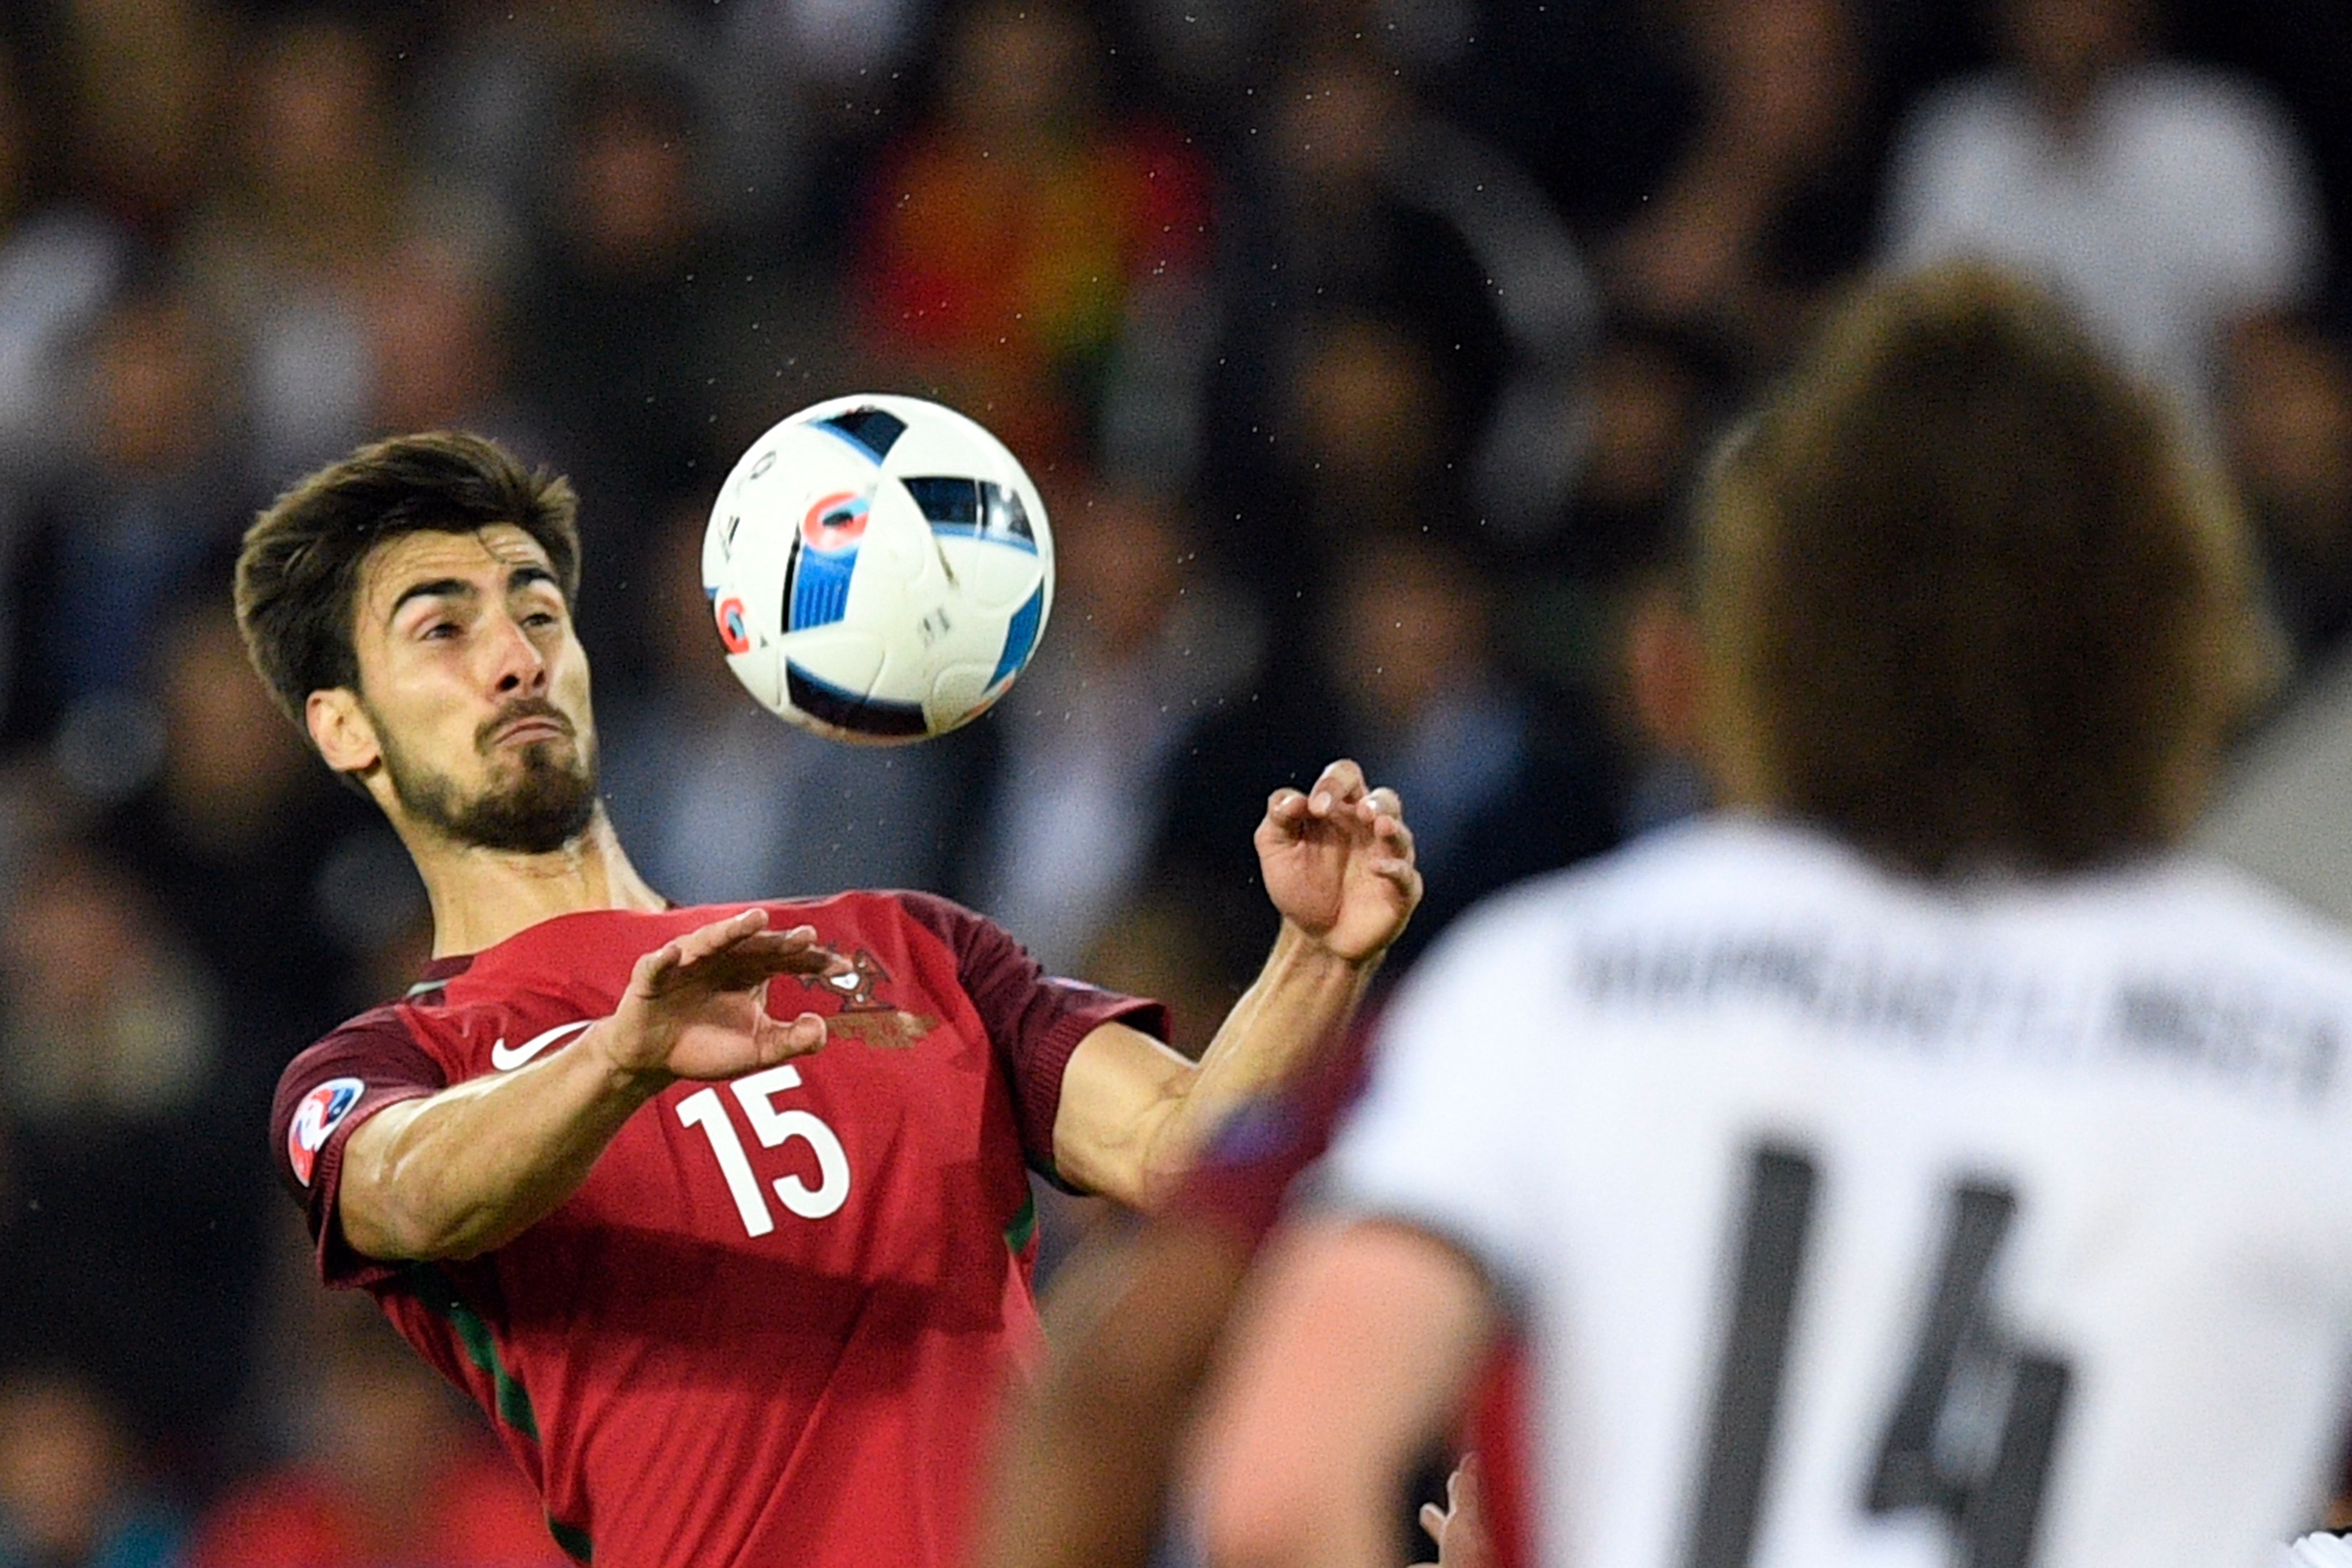 Portugal's midfielder Andre Gomes (L) plays the ball during the Euro 2016 group F football match between Portugal and Austria at the Parc des Princes in Paris on June 18, 2016. / AFP / MARTIN BUREAU        (Photo credit should read MARTIN BUREAU/AFP/Getty Images)